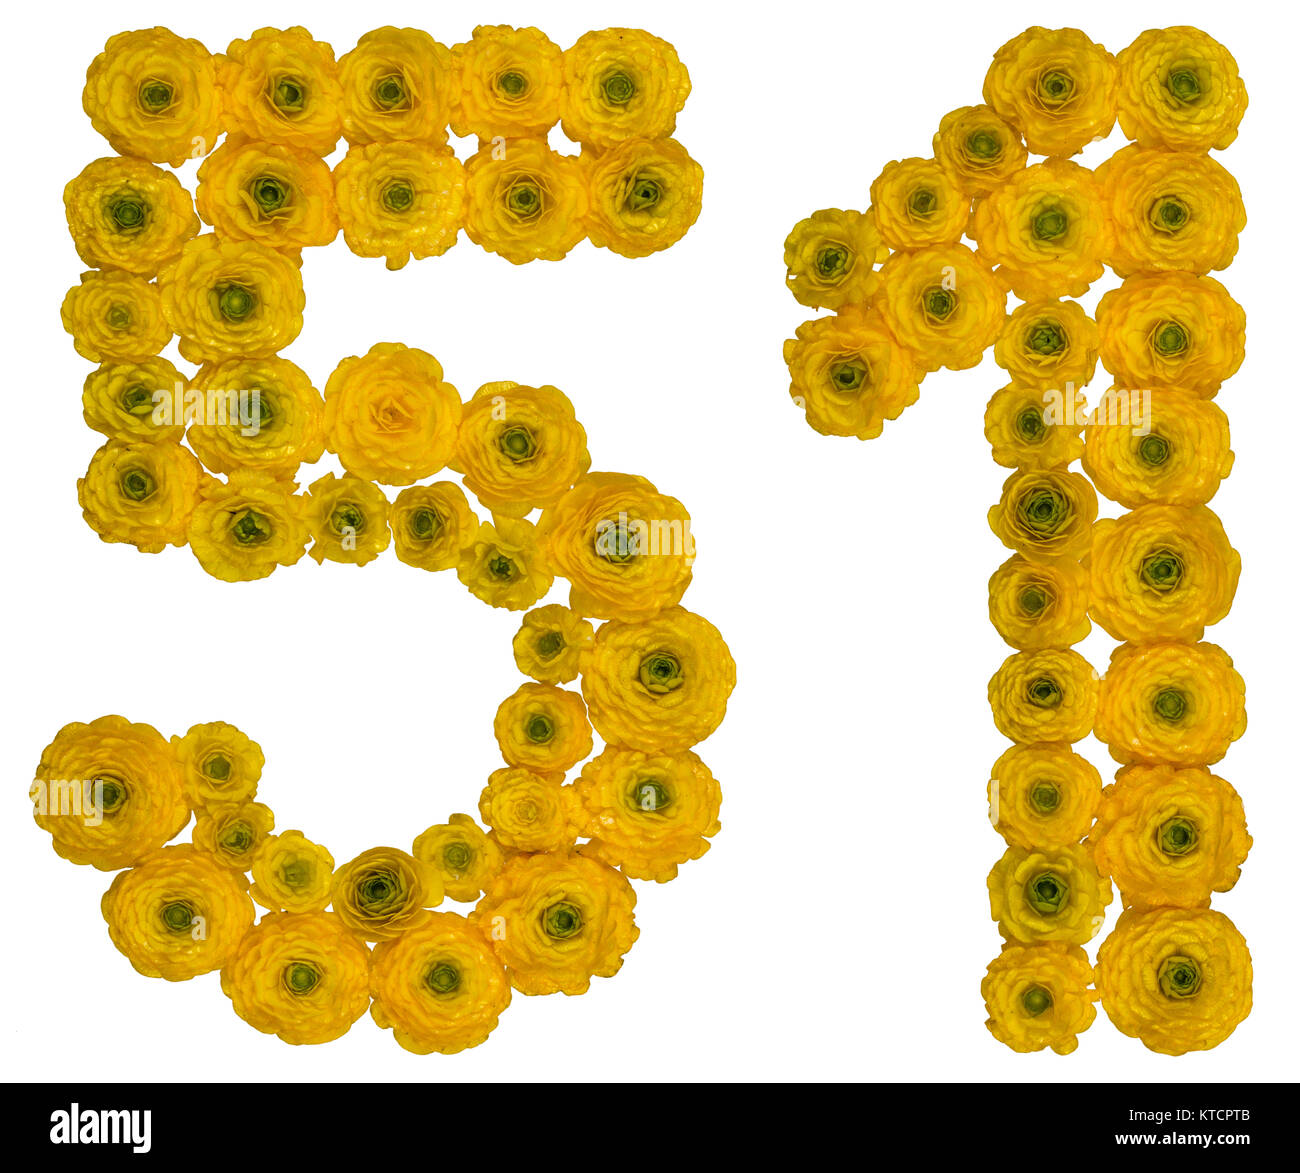 Arabic numeral 51, fifty one, from yellow flowers of buttercup, isolated on white background Stock Photo